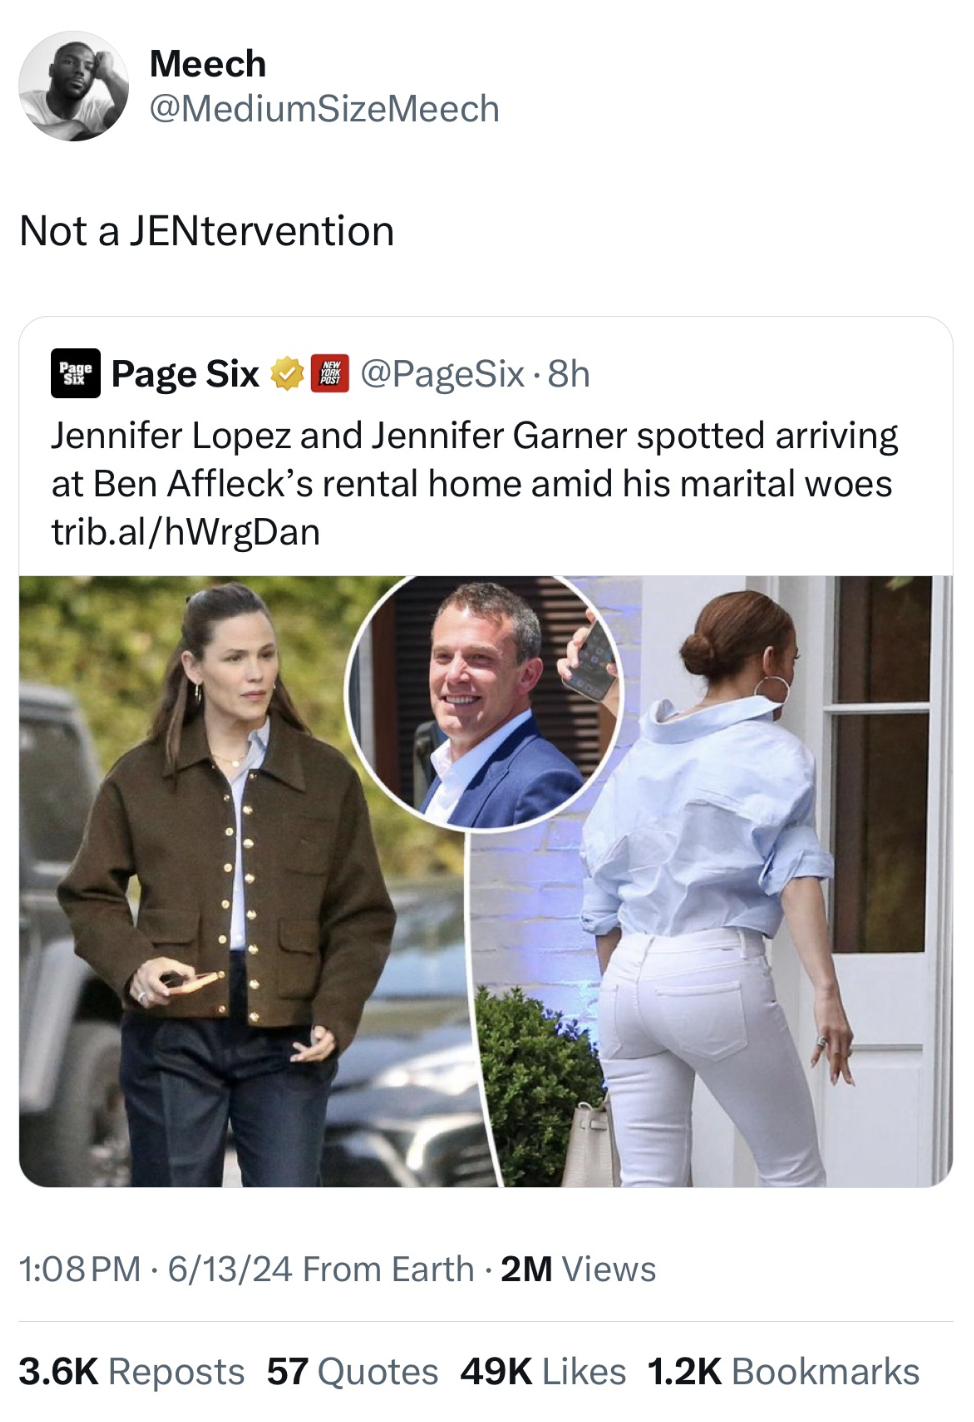 Jennifer Garner - Meech Not a JENtervention Page Six Jennifer Lopez and Jennifer Garner spotted arriving at Ben Affleck's rental home amid his marital woes trib.alhWrgDan Pm 61324 From Earth 2M Views Reposts 57 Quotes 49K Bookmarks